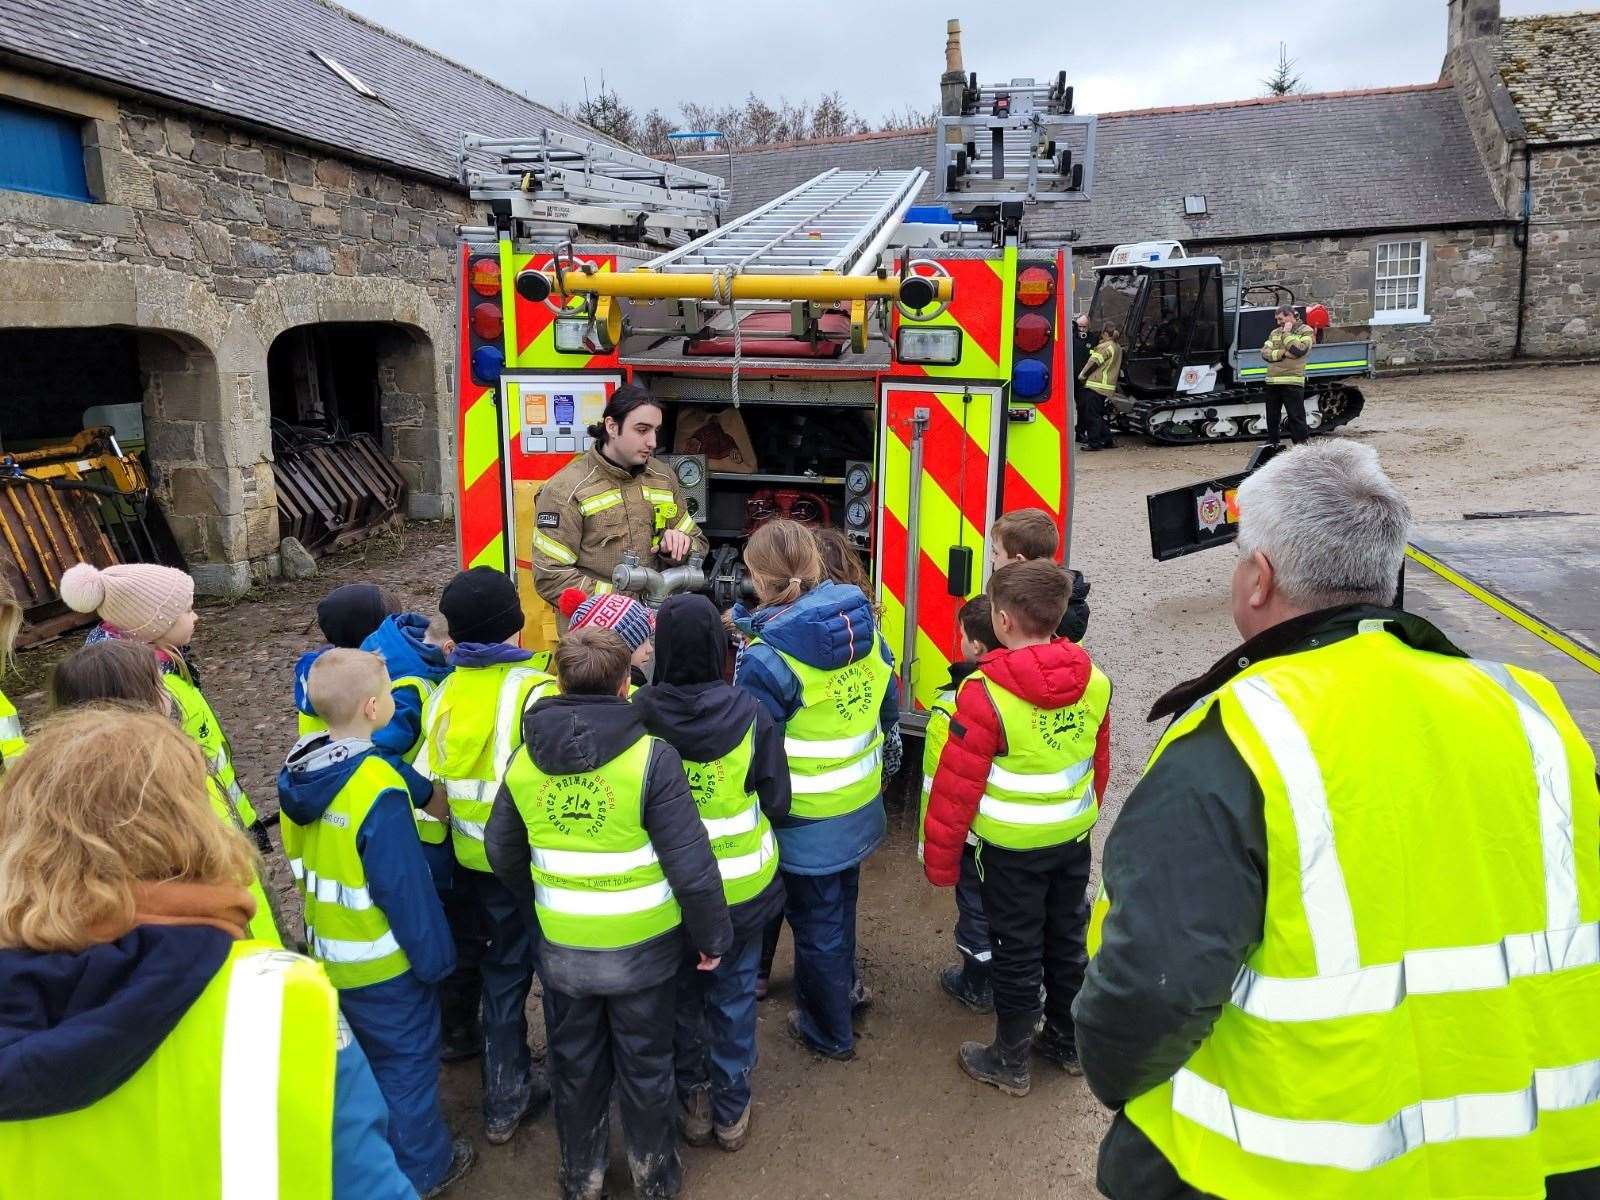 Pupils learn about the work of the Fire Service. Picture: Seafield and Strathspey Estates